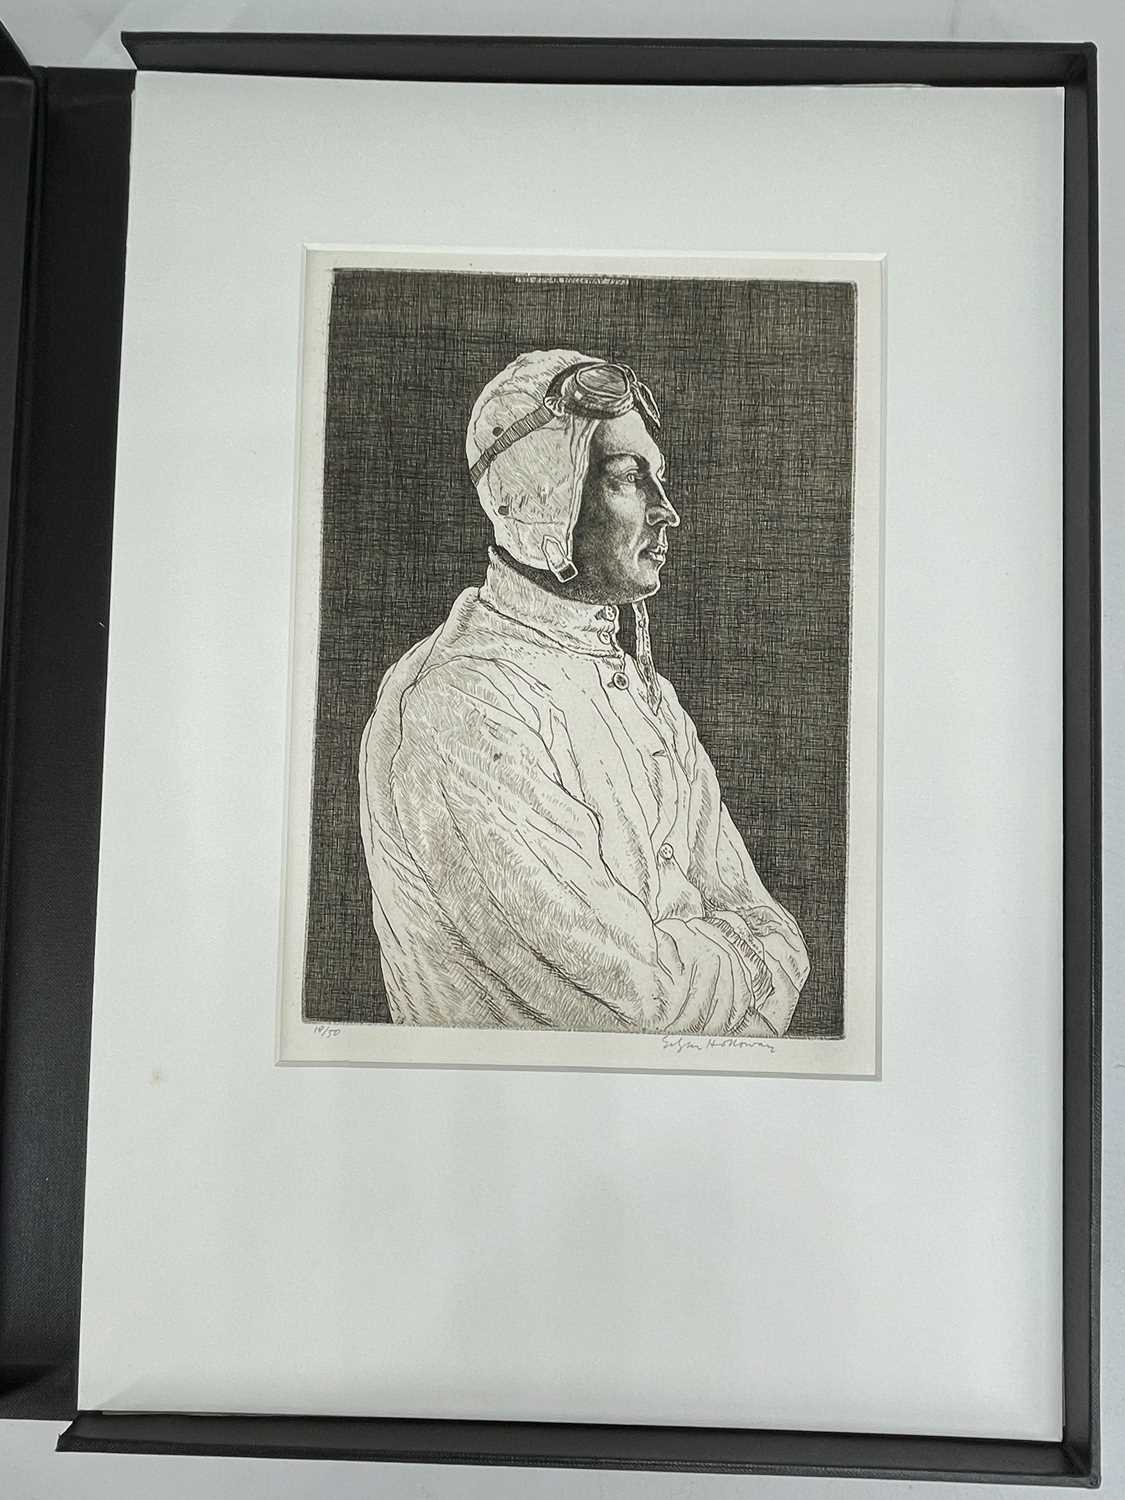 ‡ EDGAR HOLLOWAY limited edition (7/40) portfolio of seven etchings and engravings produced by - Image 11 of 13